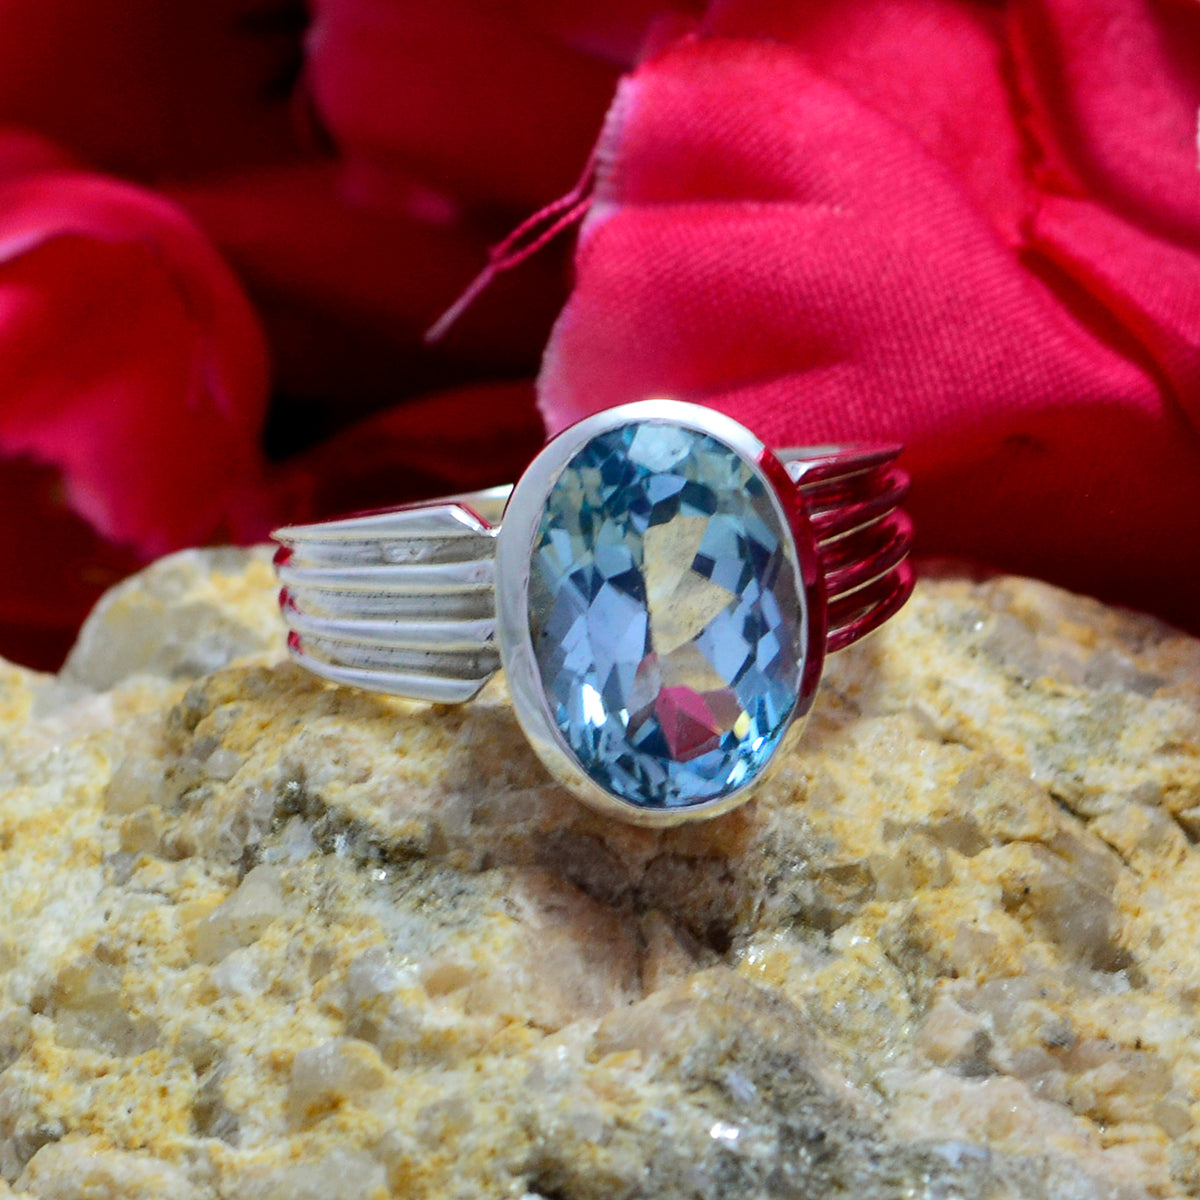 Grand Gemstone Blue Topaz Sterling Silver Ring Jewelry Mannequin